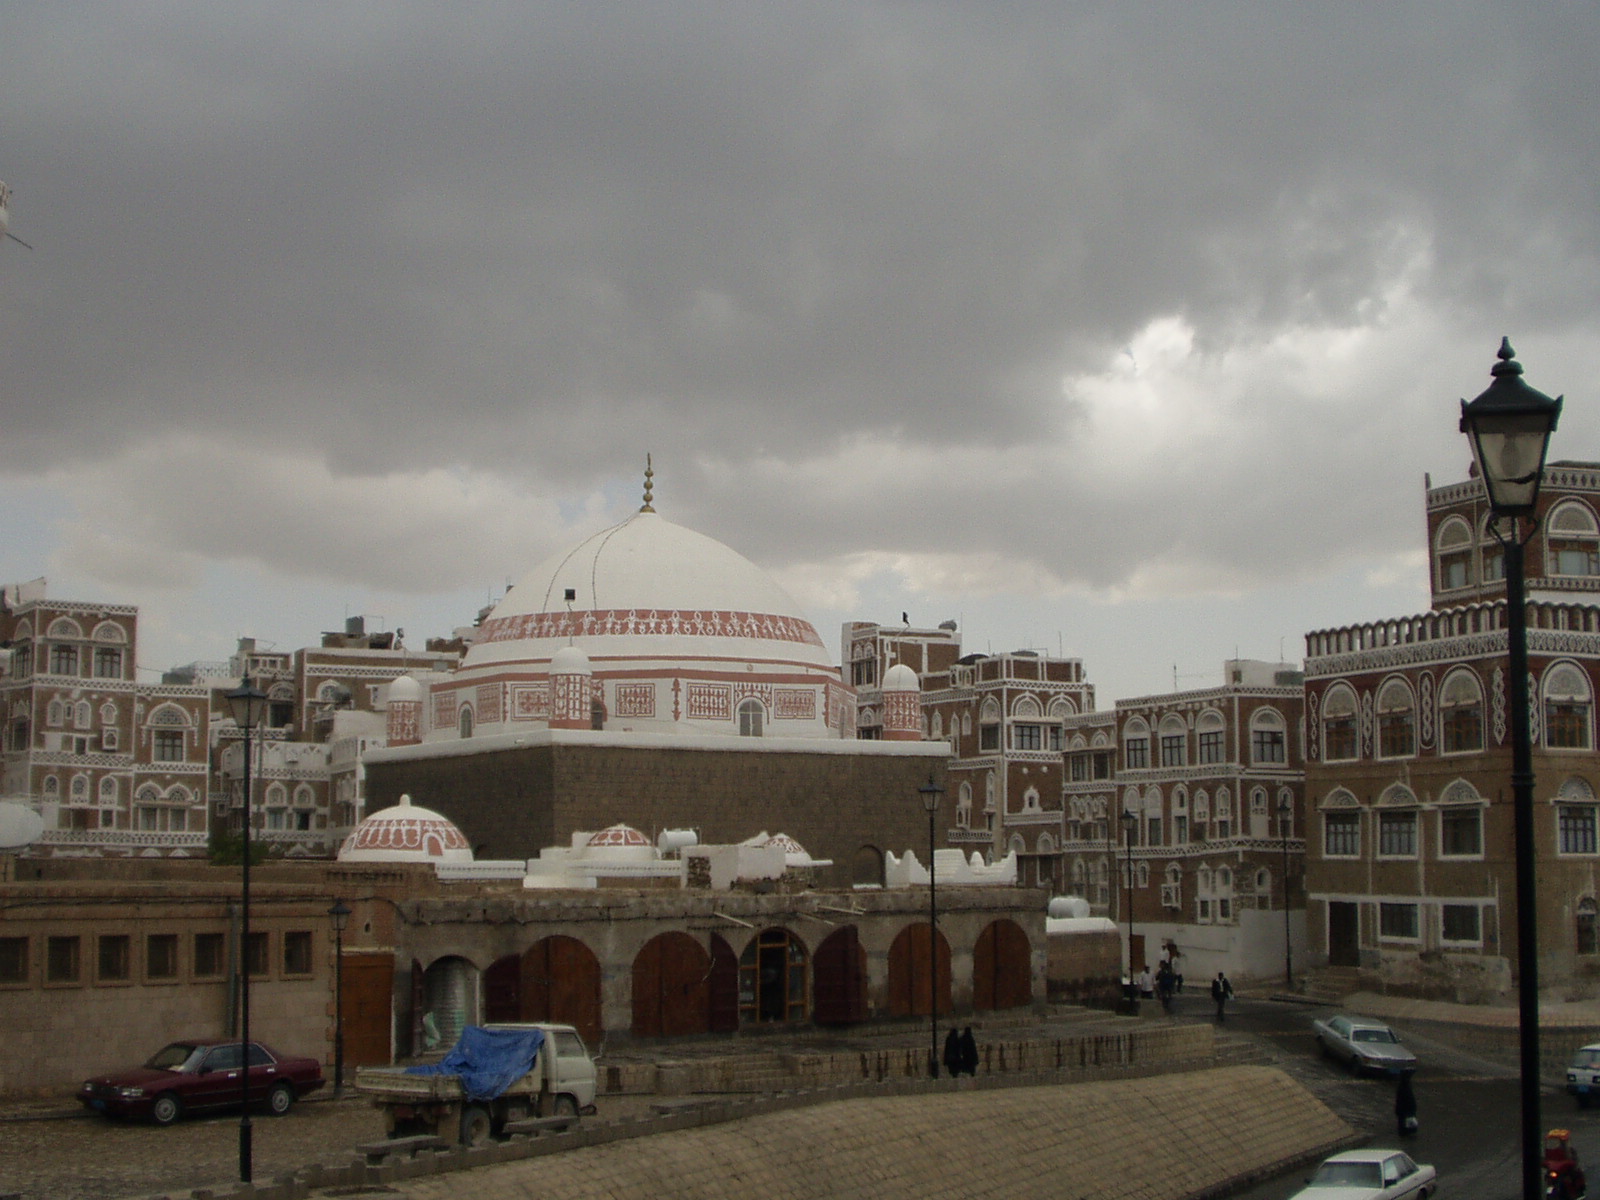 The big mosque on the Wadi street